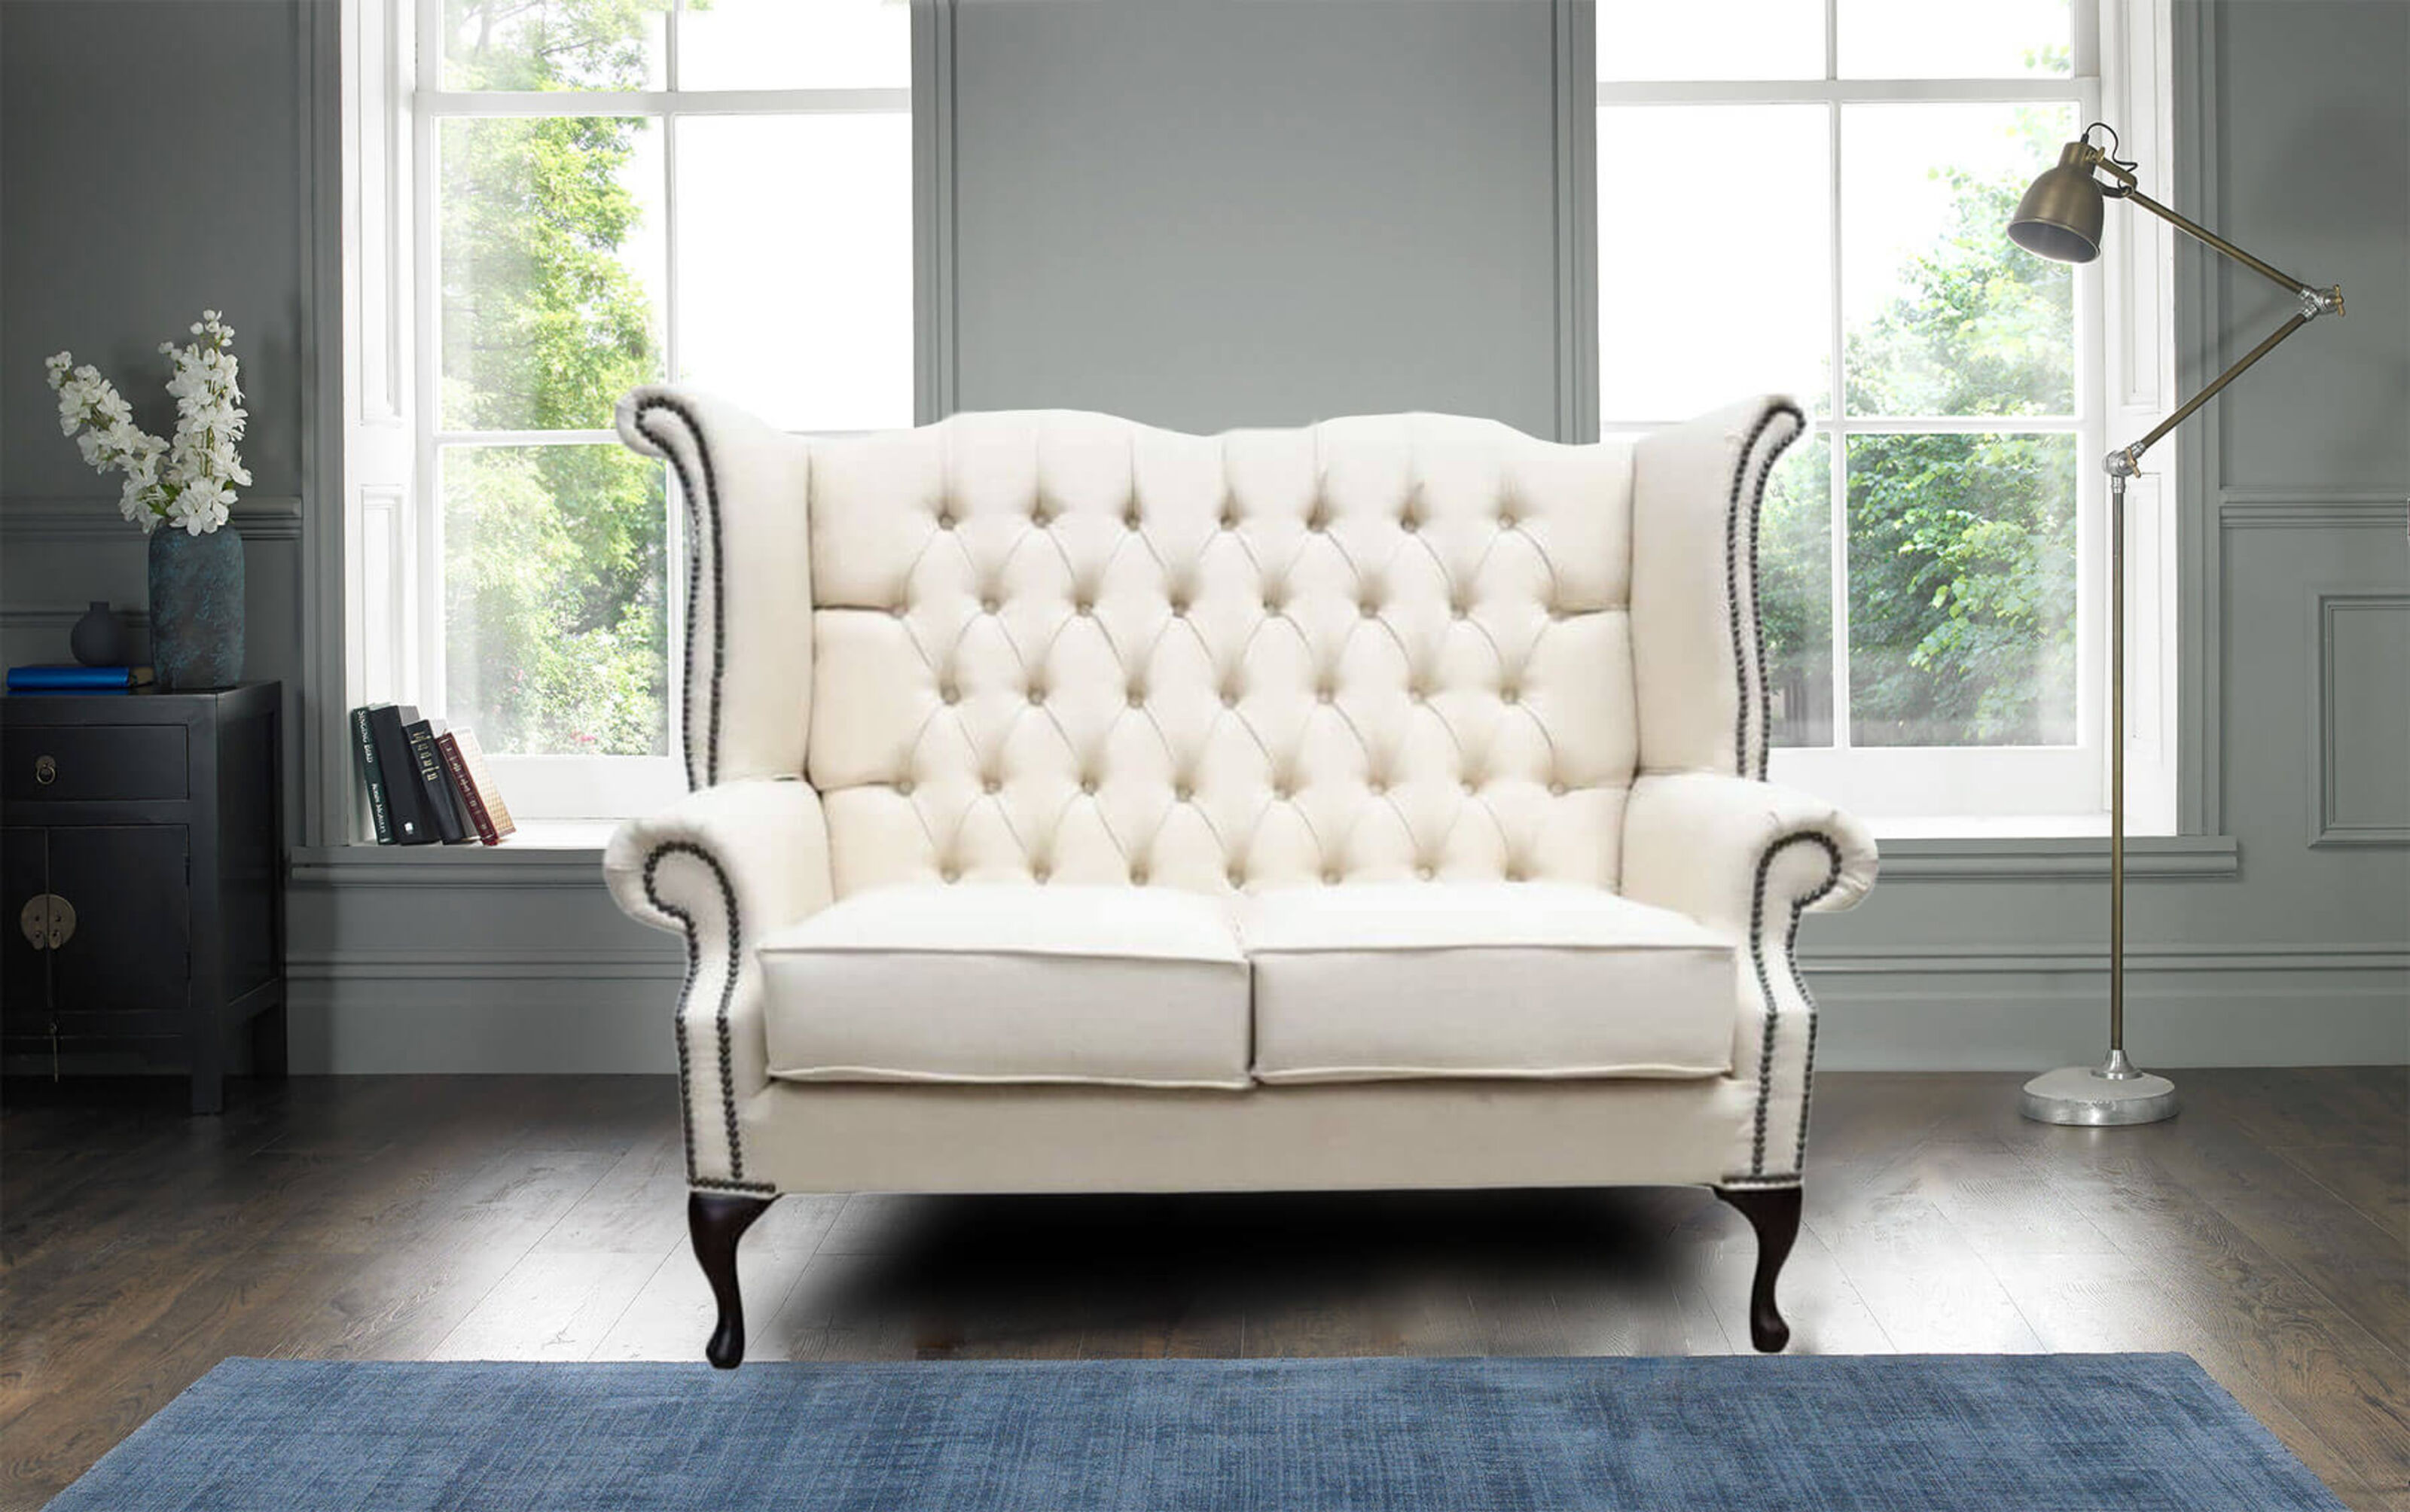 Why Are Chesterfield Sofas So Expensive?  %Post Title